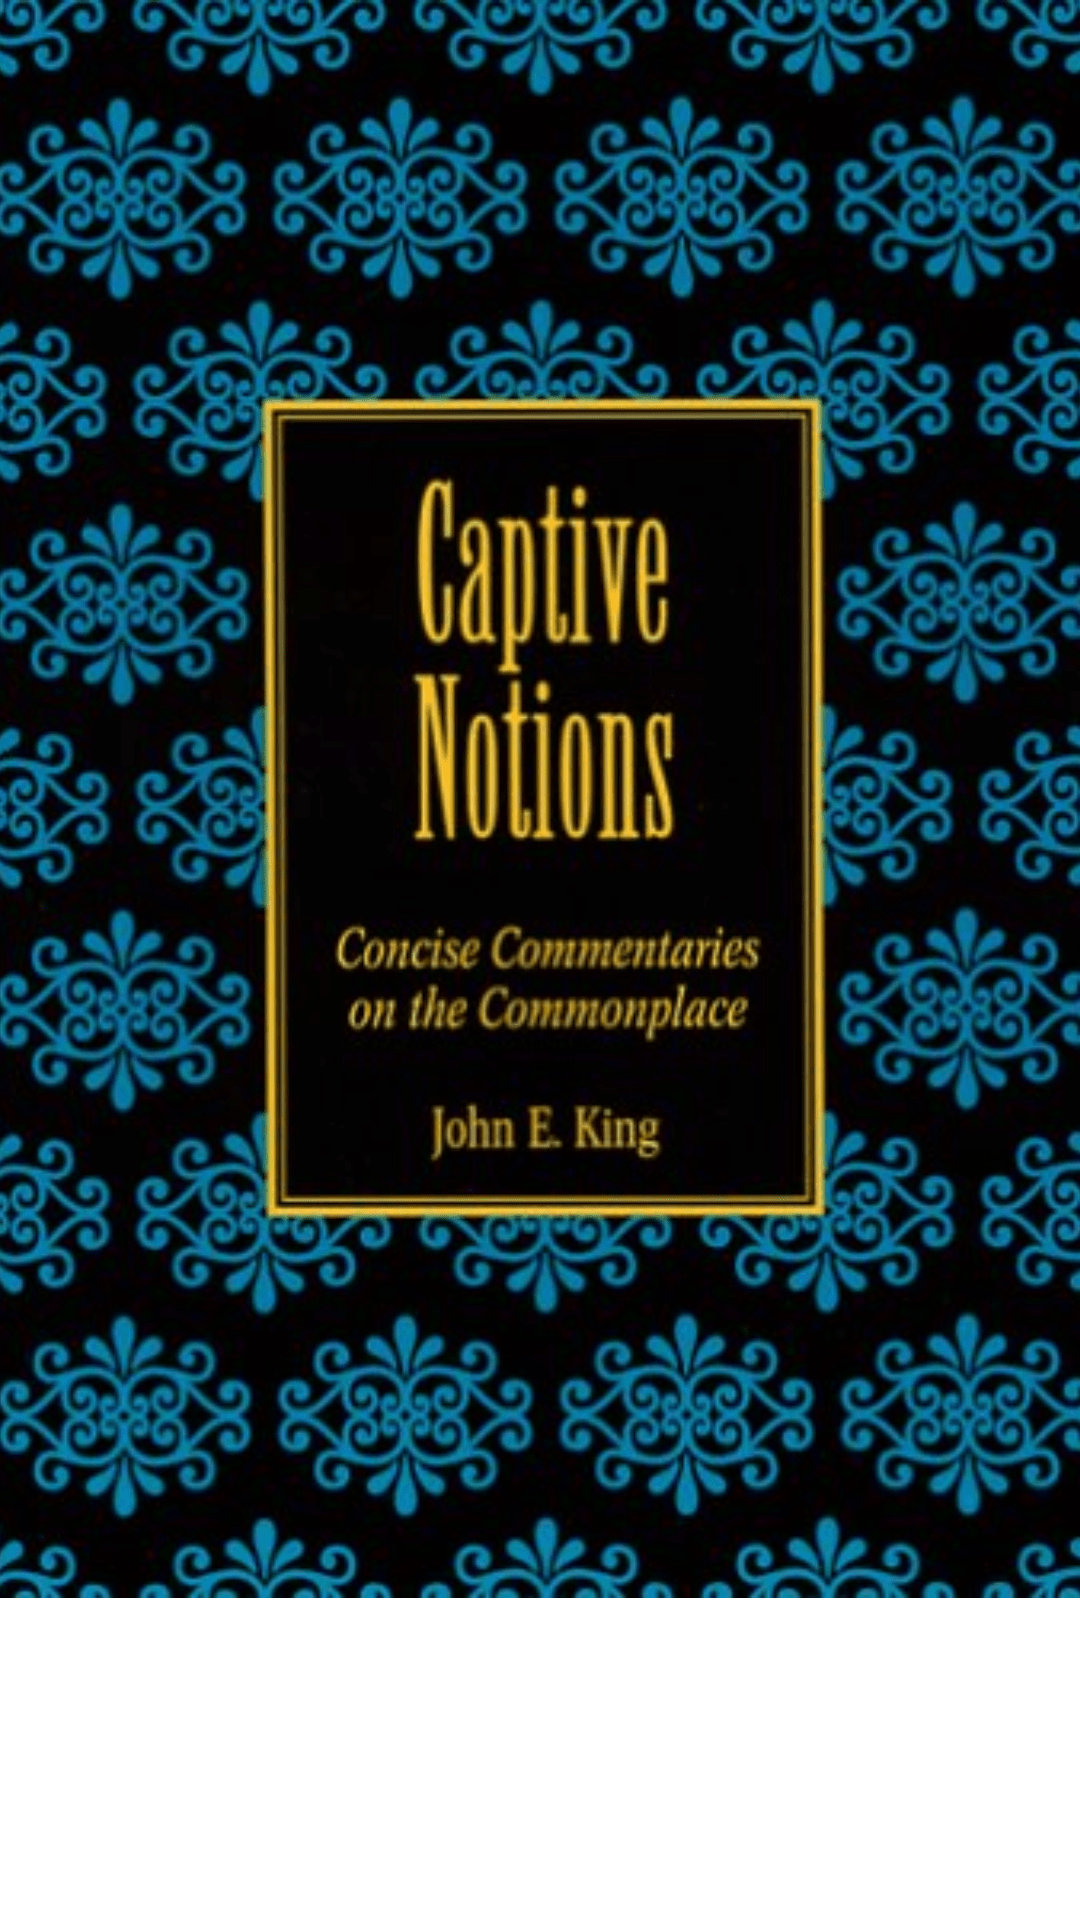 Captive Notions: Concise Commentaries on the Commonplace